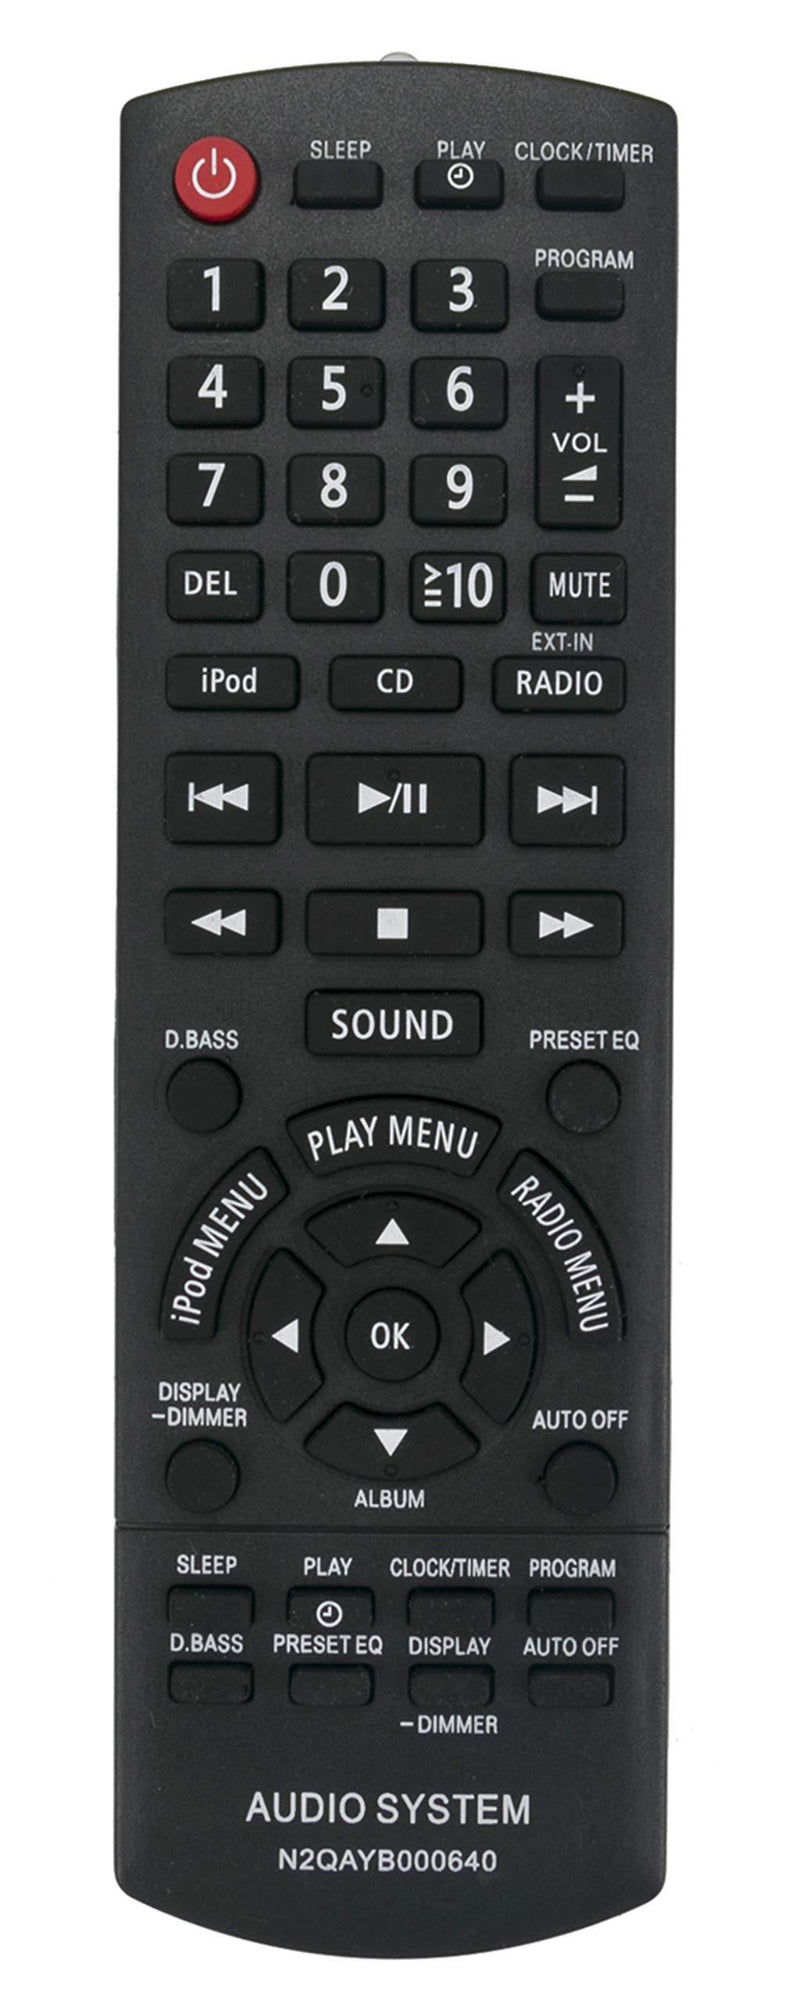 N2QAYB000640 Replaced Remote fit for Panasonic SC-HC25 SA-HC25 SC-PM500 SA-PM500 SB-PM500 SC-PM500DB SA-PM500DB SB-PM500 CD Stereo System Compact Stereo System